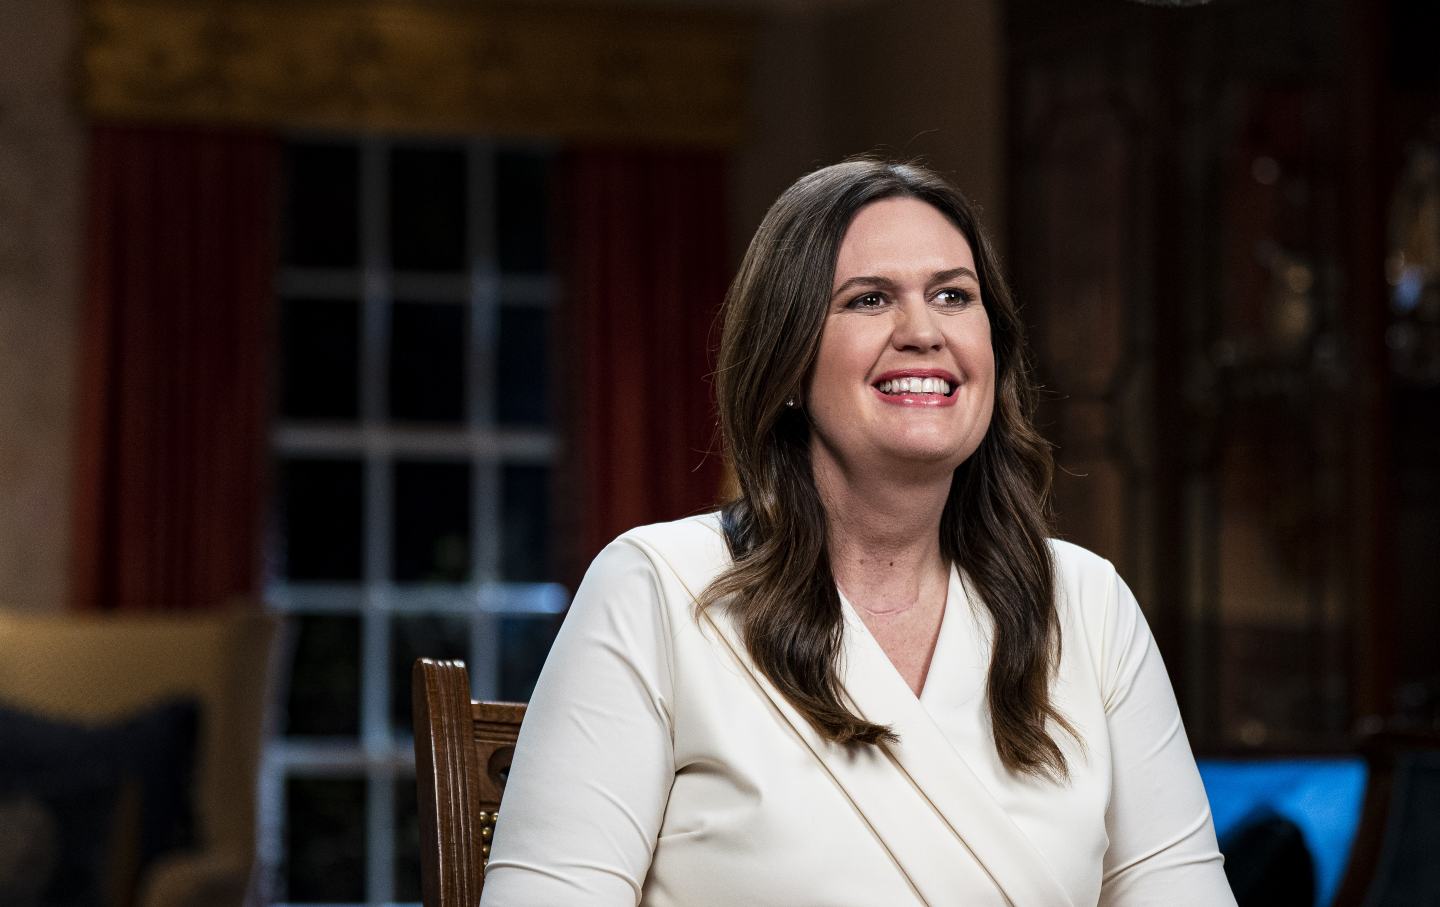 Sarah Huckabee Sanders, governor of Arkansas, speaks while delivering the Republican response to President Biden's State of the Union address on February 7, 2023.